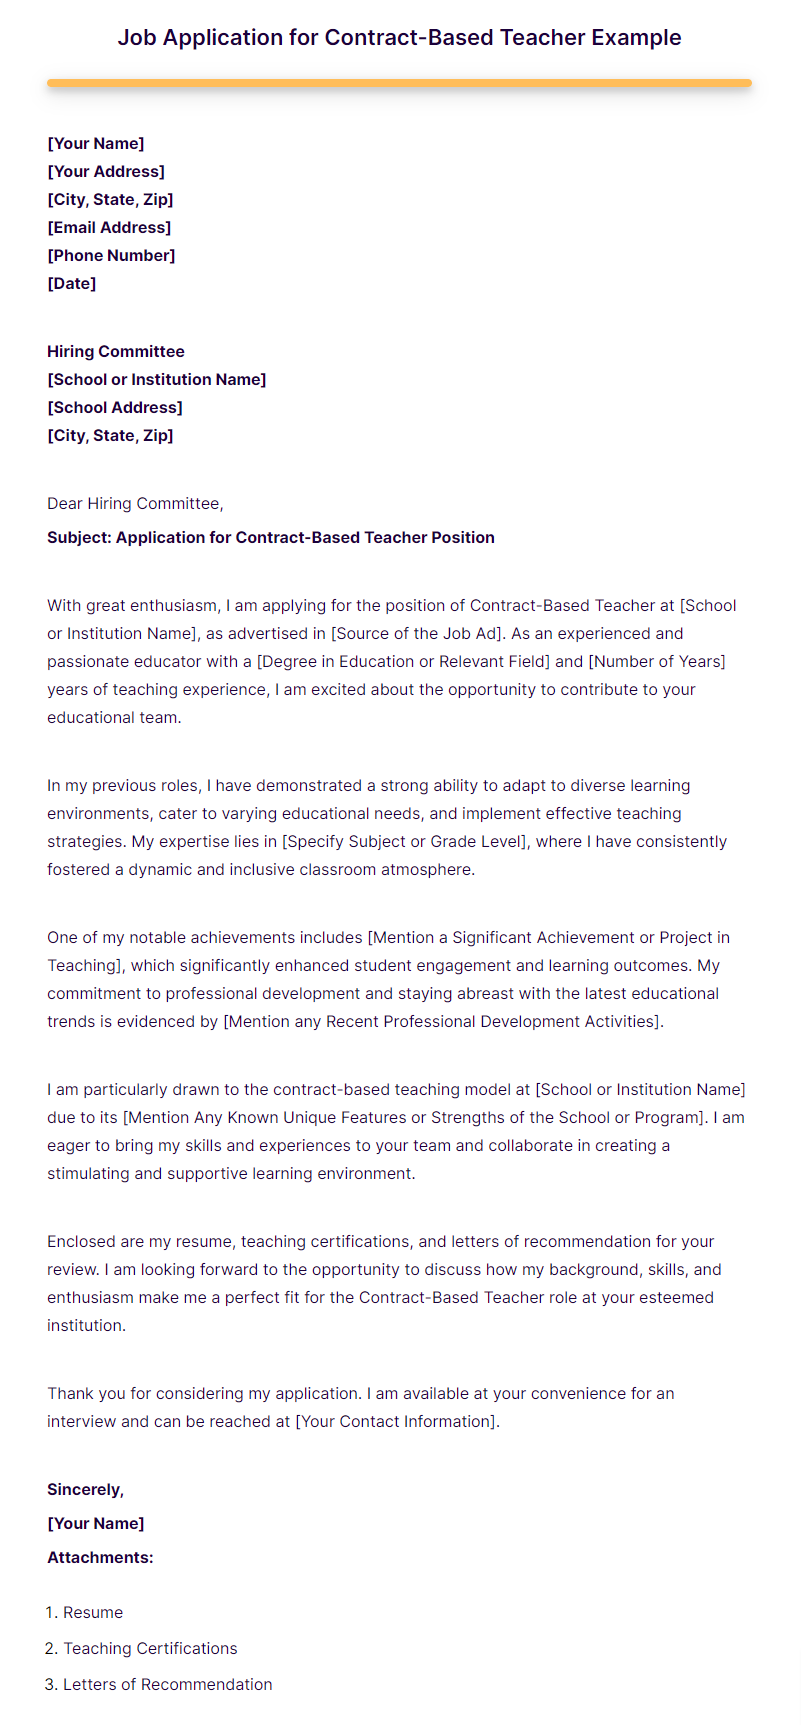 job application for contract based teacher